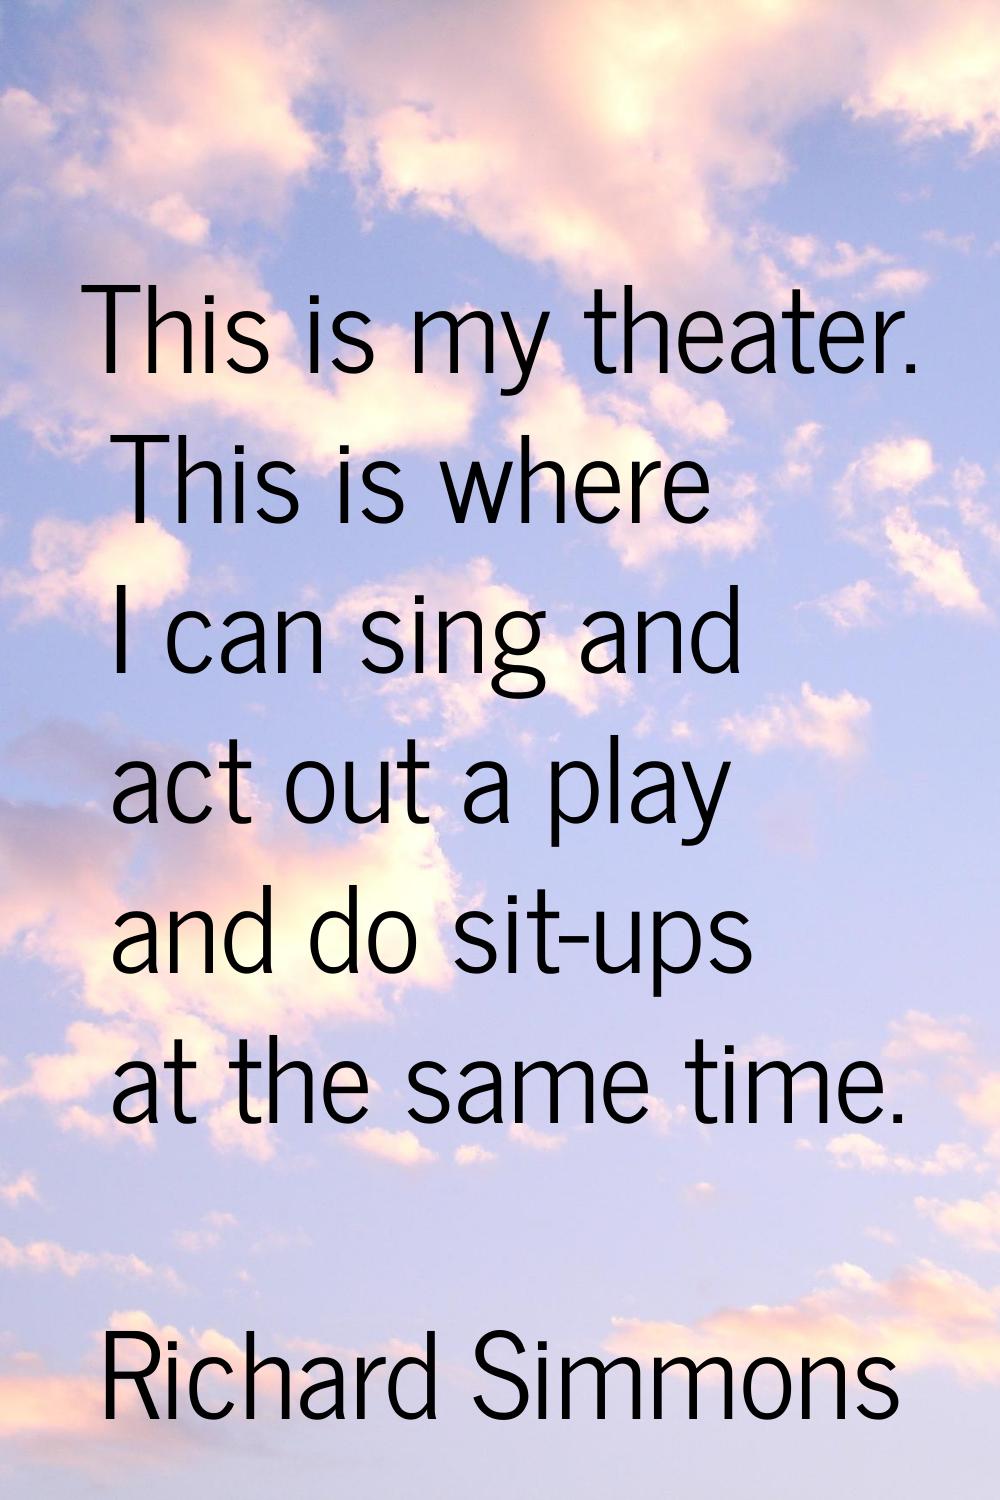 This is my theater. This is where I can sing and act out a play and do sit-ups at the same time.